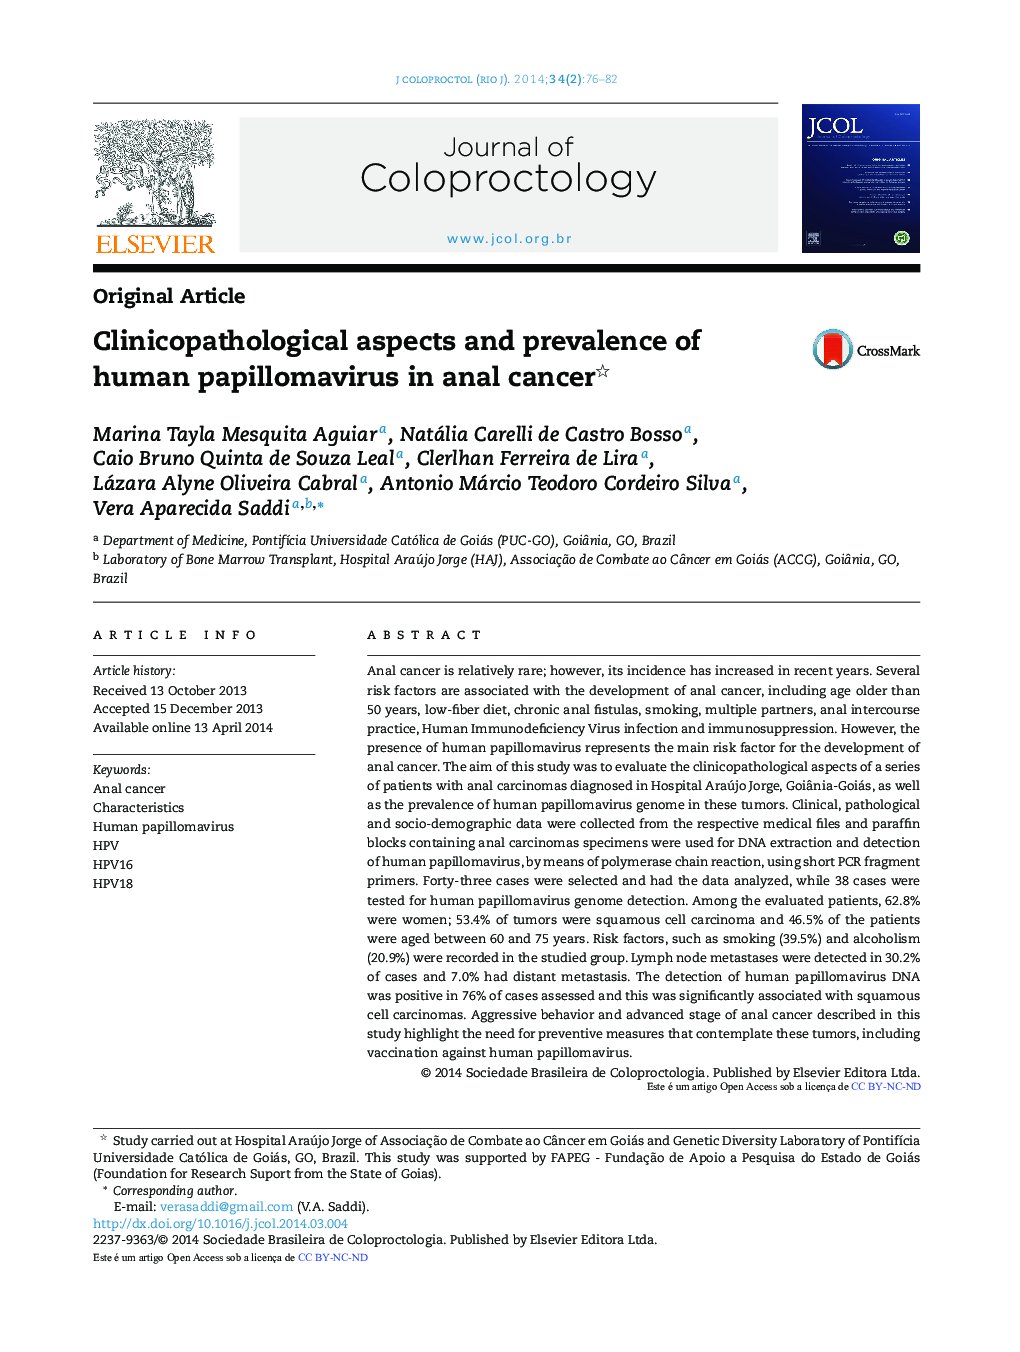 Clinicopathological aspects and prevalence of human papillomavirus in anal cancer 